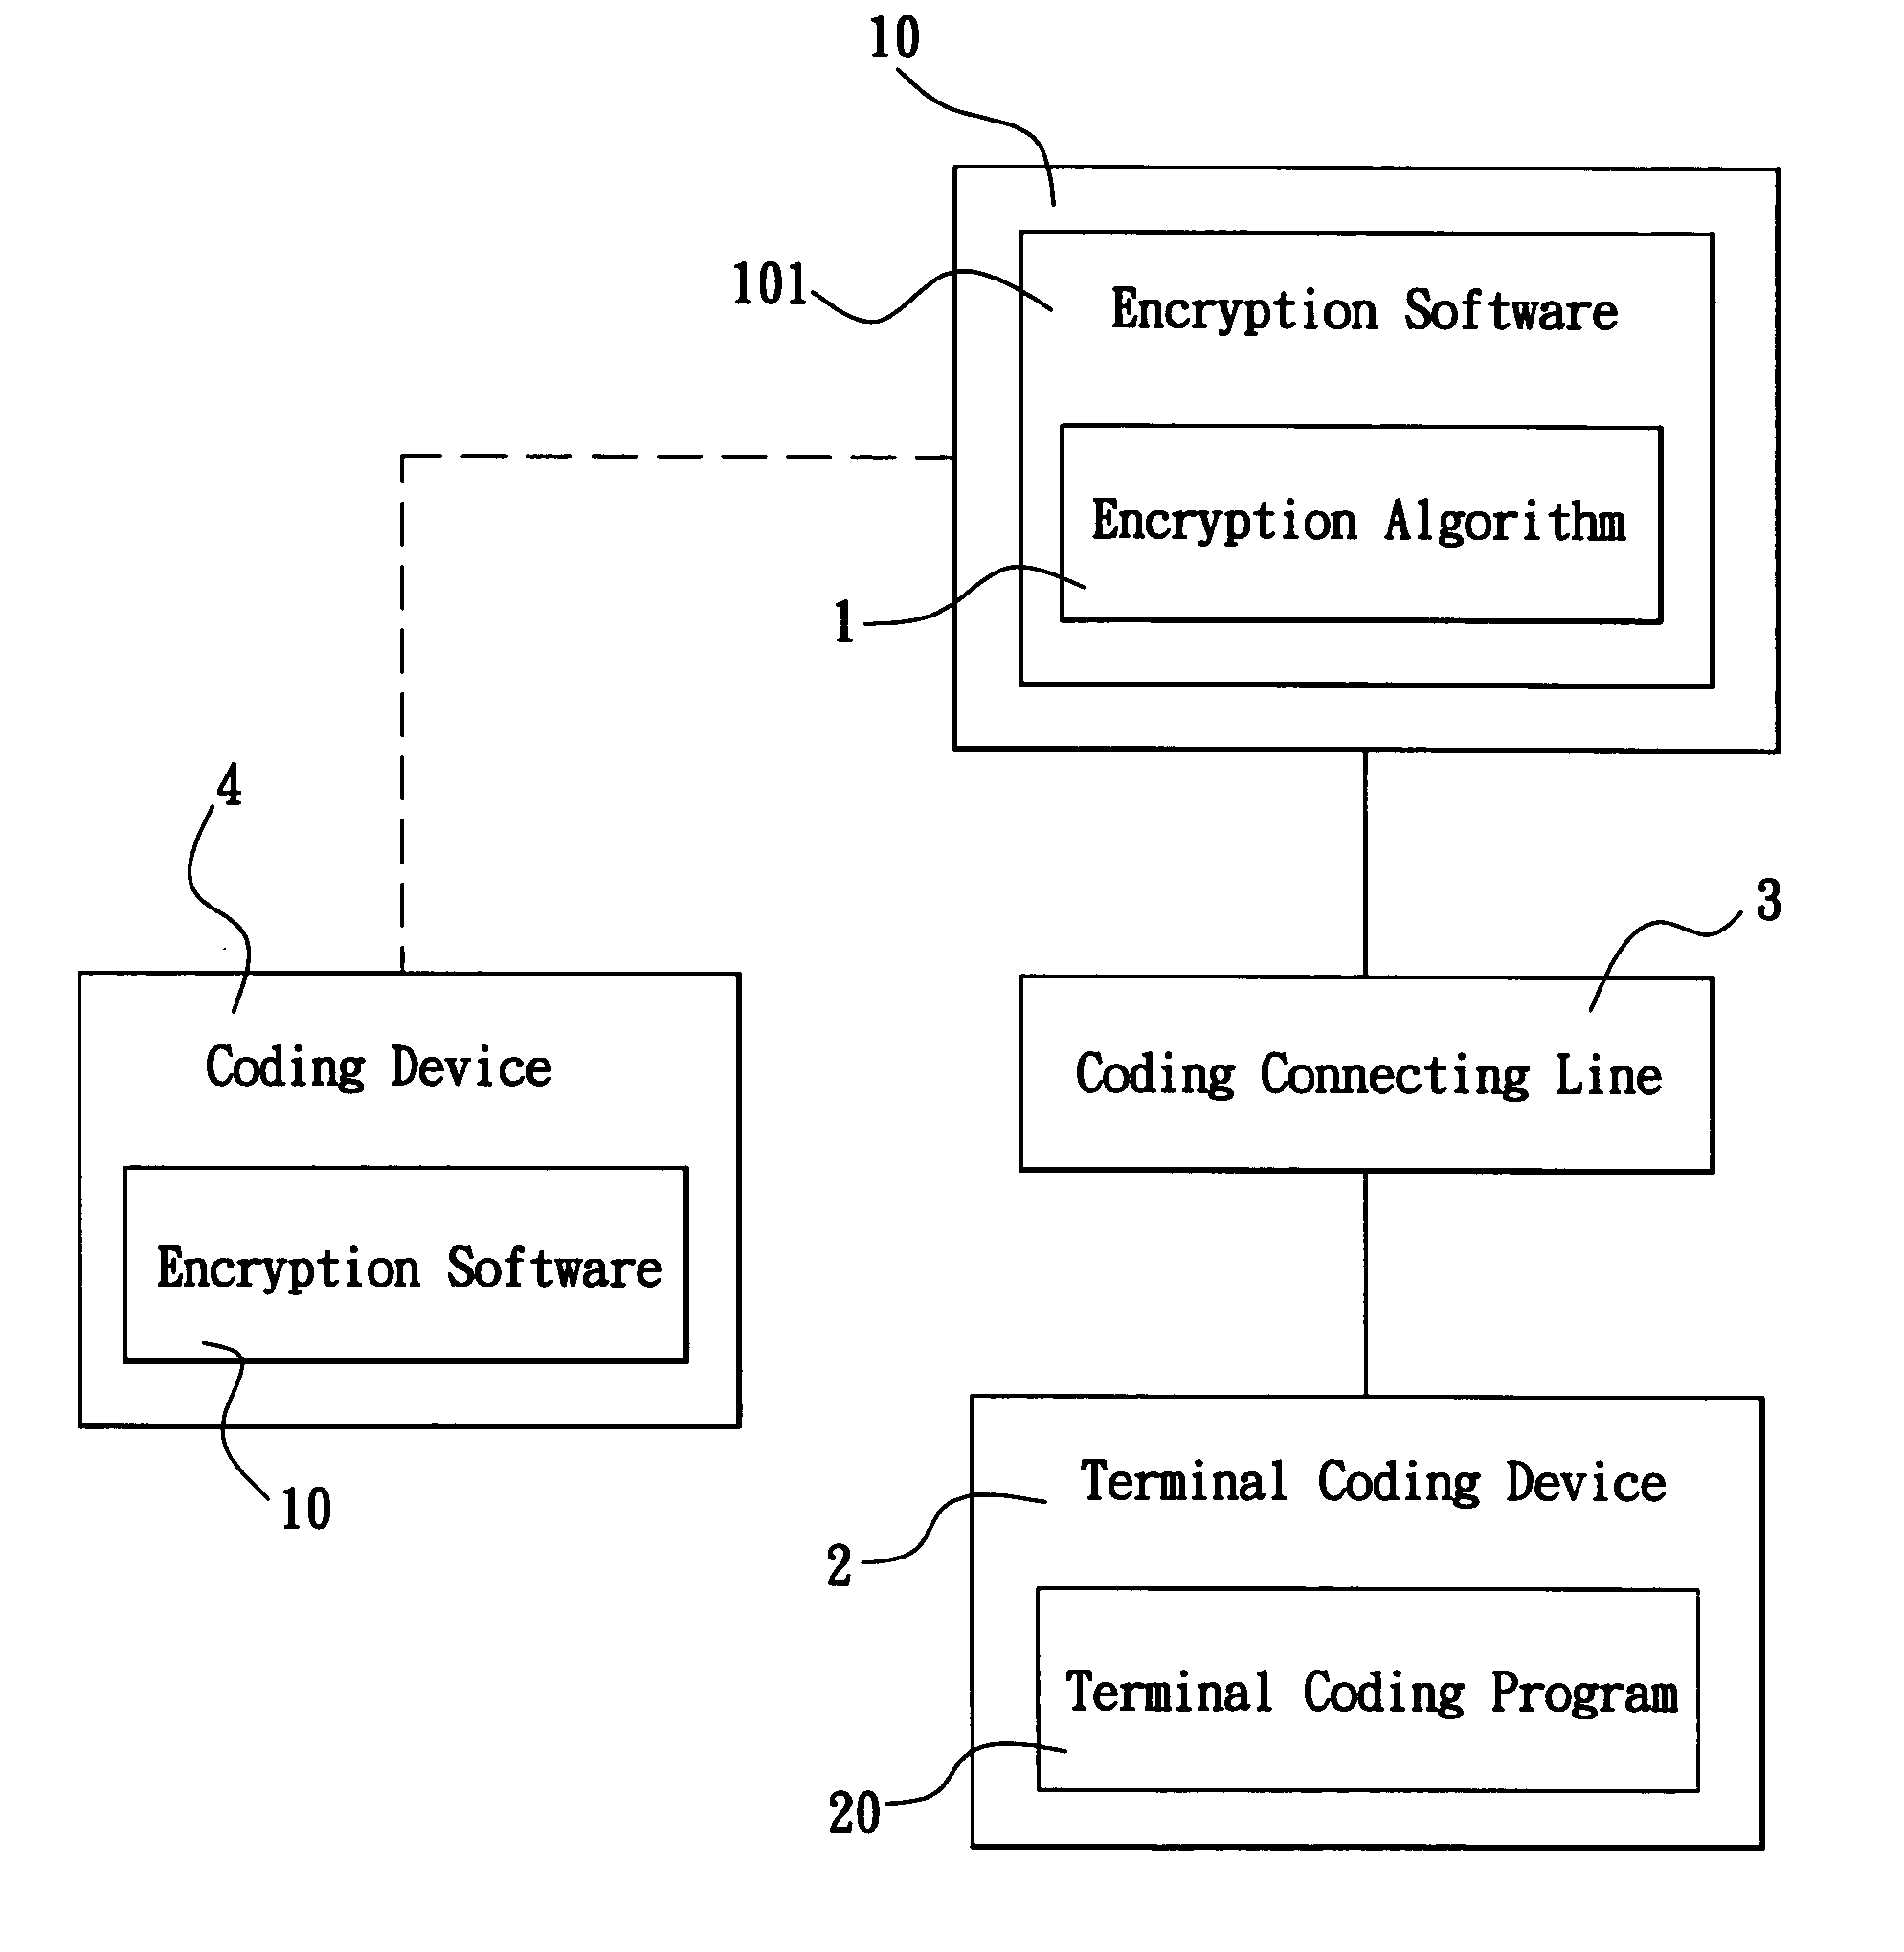 Method for preventing personal handy-phone system handset from being reassigned with new phone number